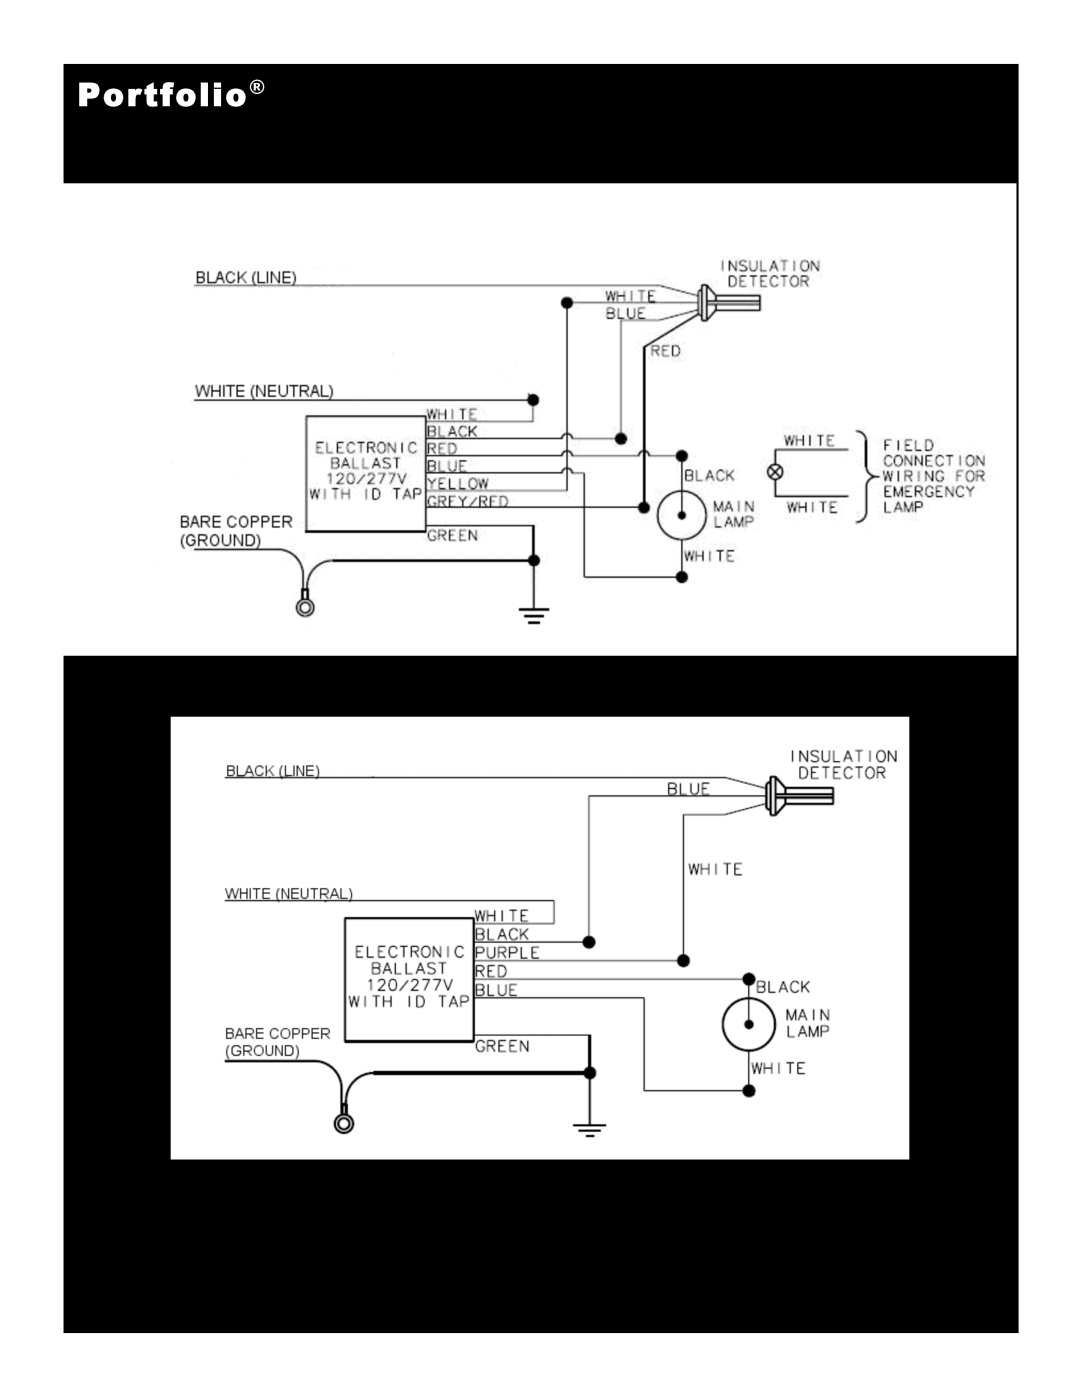 Cooper Lighting MD6CPxT6, MD6xT4, MD6xT6, MD6CPxT4 installation instructions Portfolio, 704530 Rev. A 